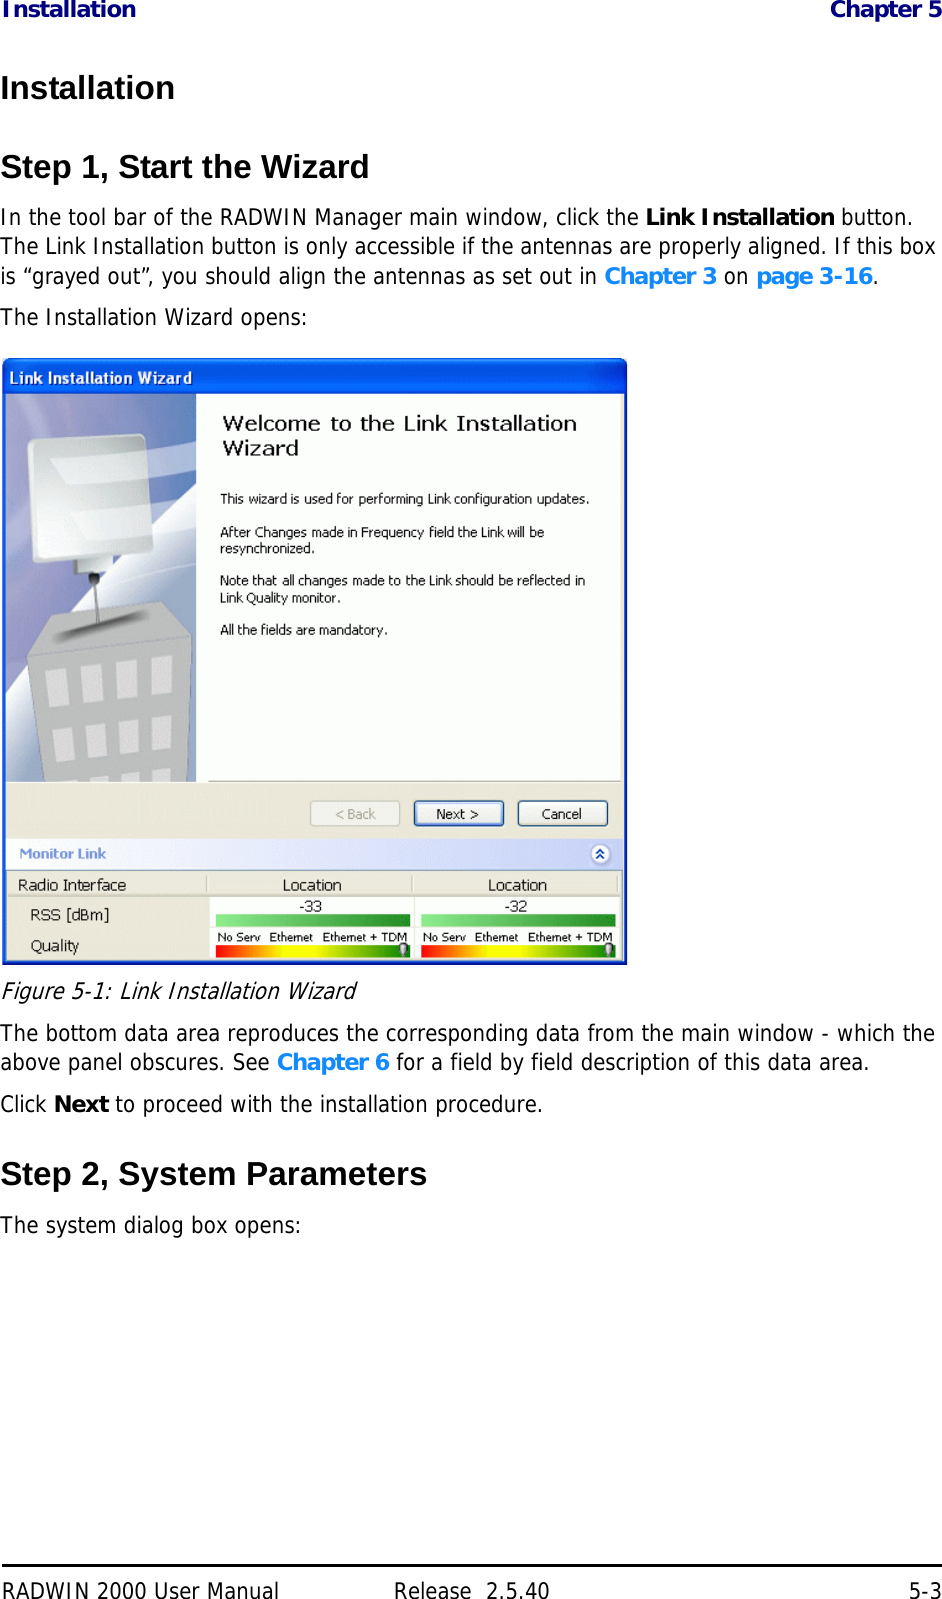 Installation Chapter 5RADWIN 2000 User Manual Release  2.5.40 5-3InstallationStep 1, Start the WizardIn the tool bar of the RADWIN Manager main window, click the Link Installation button. The Link Installation button is only accessible if the antennas are properly aligned. If this box is “grayed out”, you should align the antennas as set out in Chapter 3 on page 3-16.The Installation Wizard opens:Figure 5-1: Link Installation WizardThe bottom data area reproduces the corresponding data from the main window - which the above panel obscures. See Chapter 6 for a field by field description of this data area.Click Next to proceed with the installation procedure.Step 2, System ParametersThe system dialog box opens: